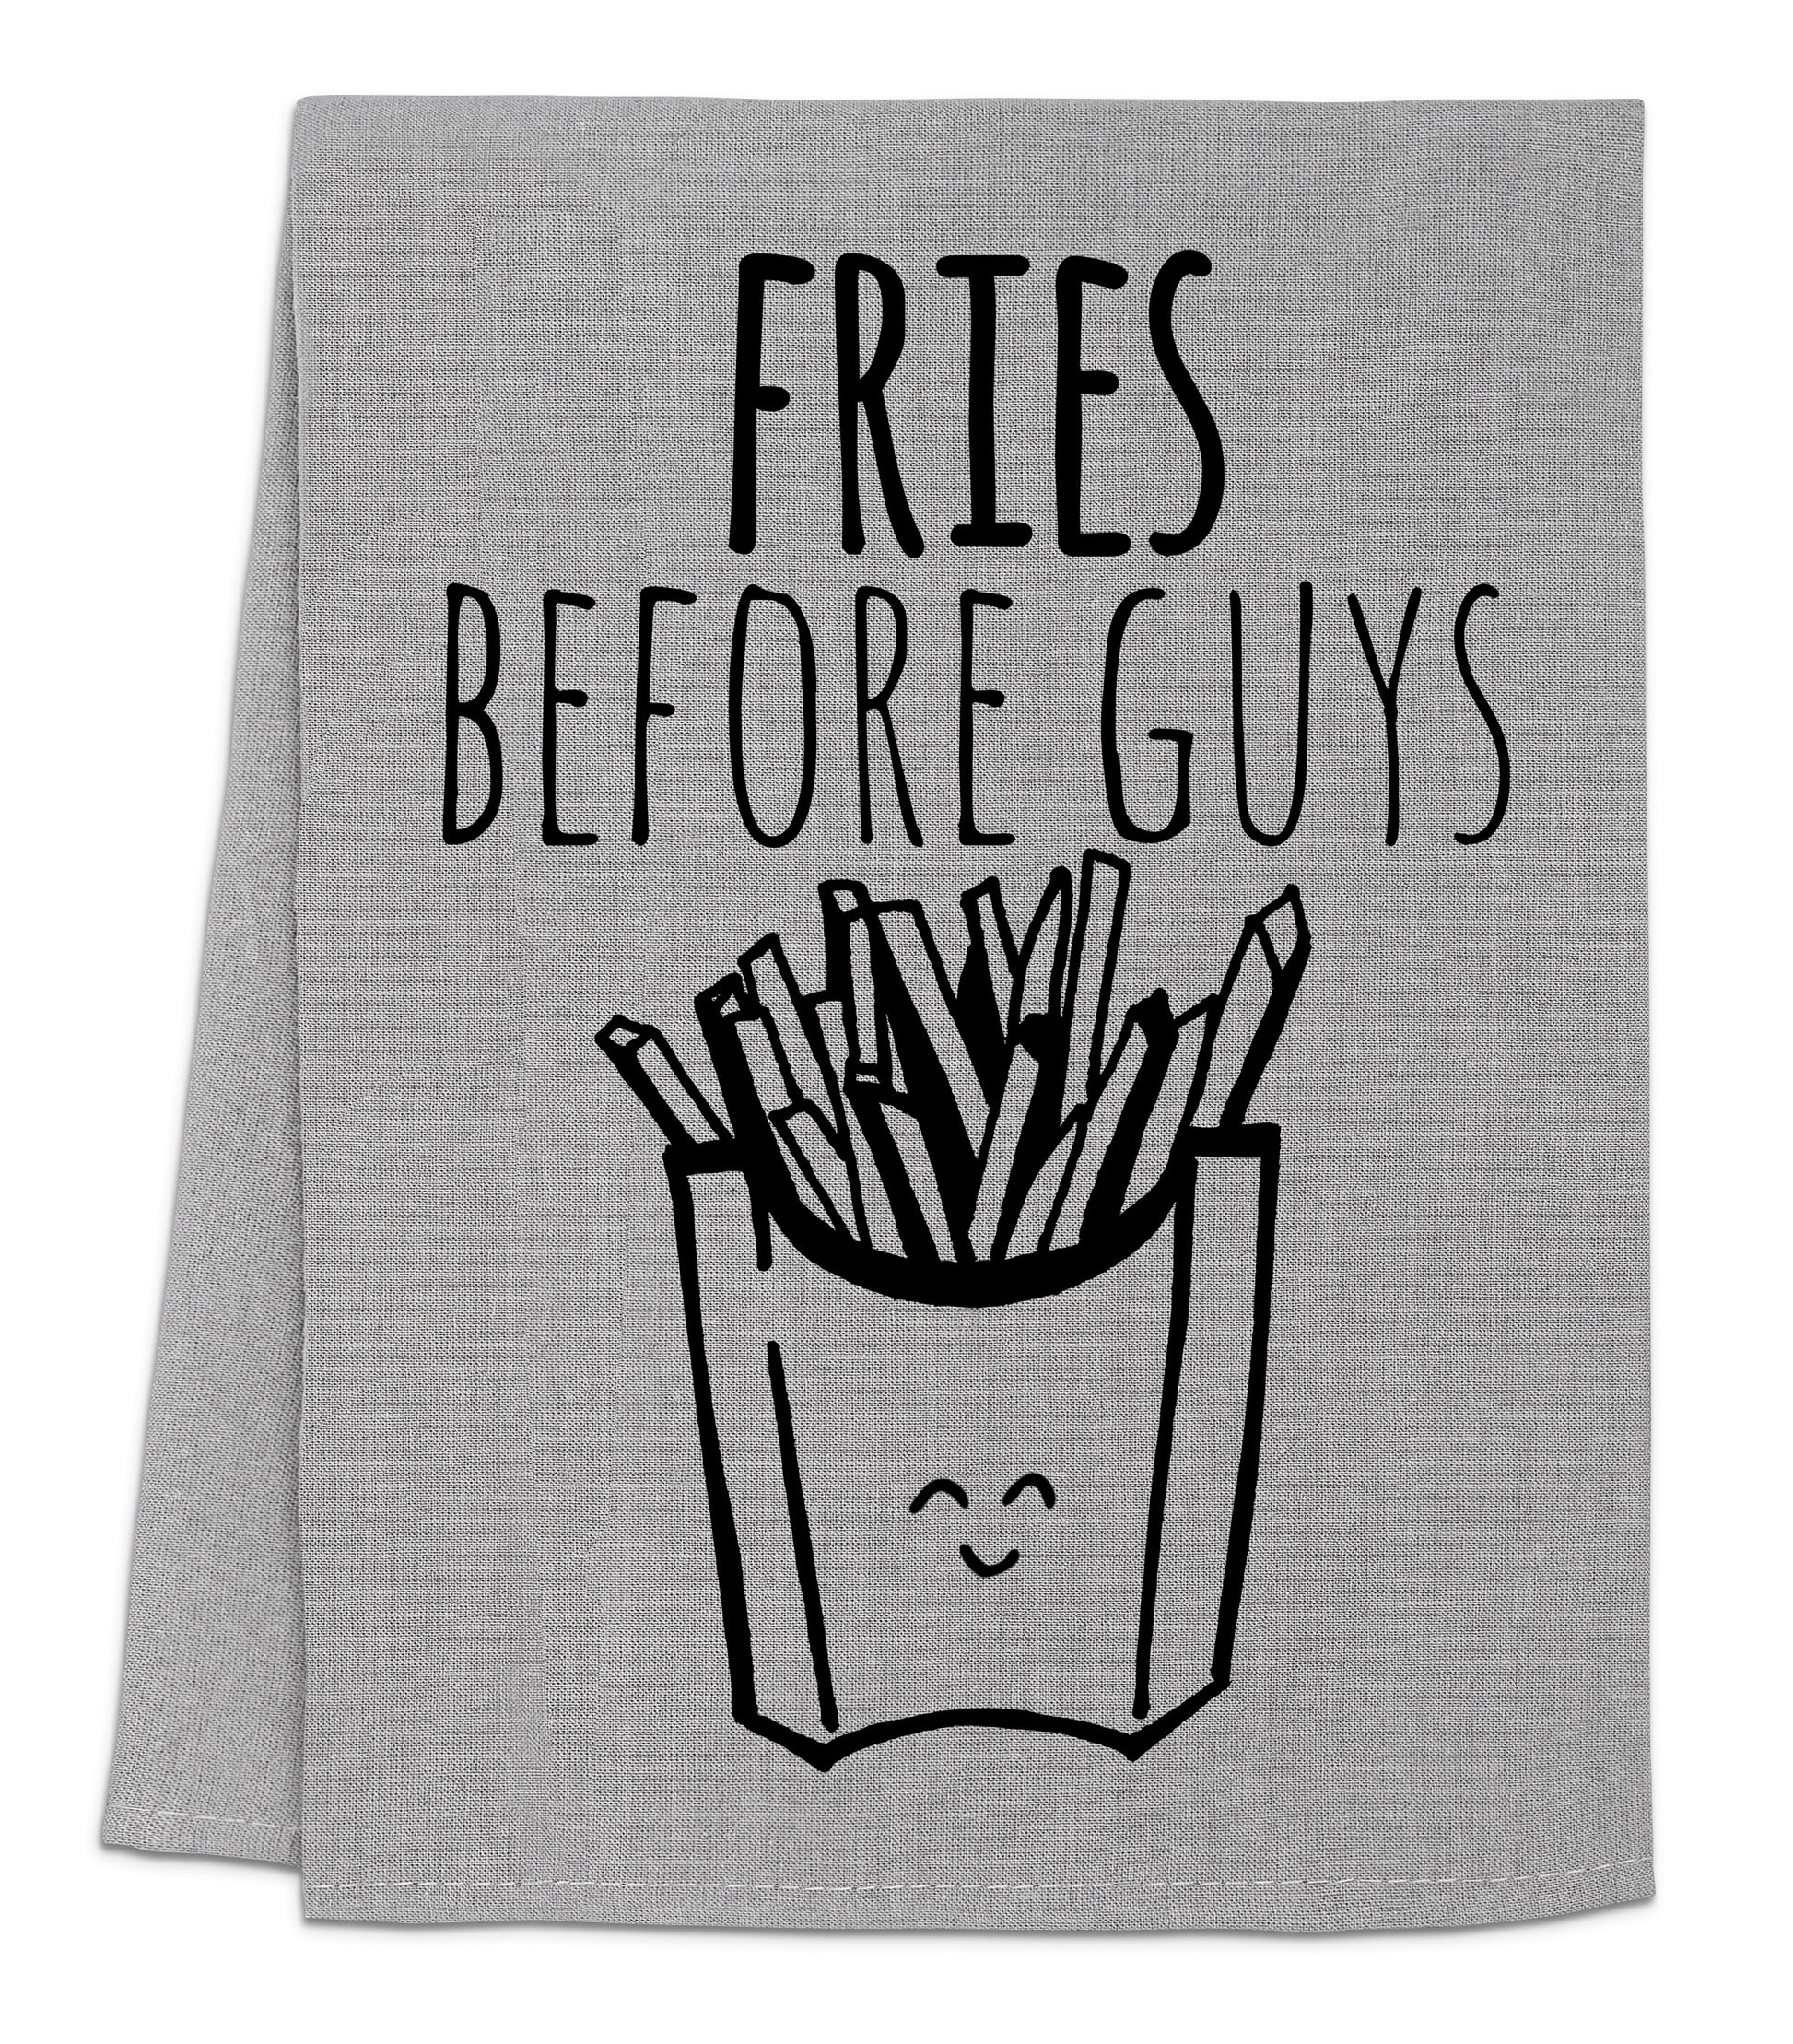 a towel with fries before guys written on it